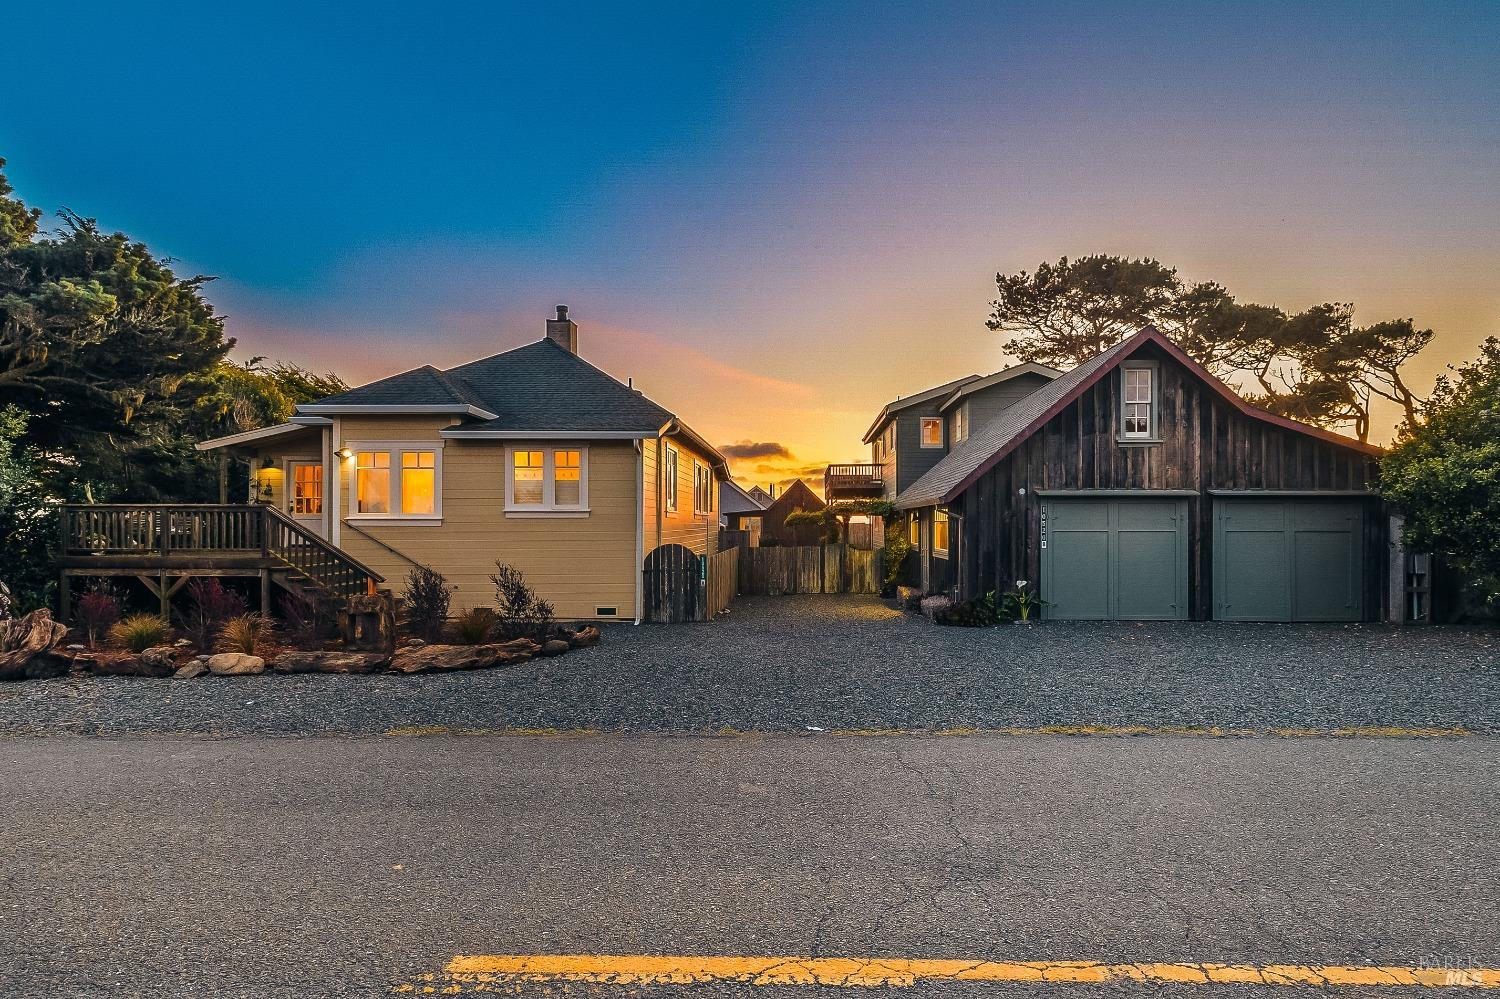 Photo of 10520 Kelly St in Mendocino, CA